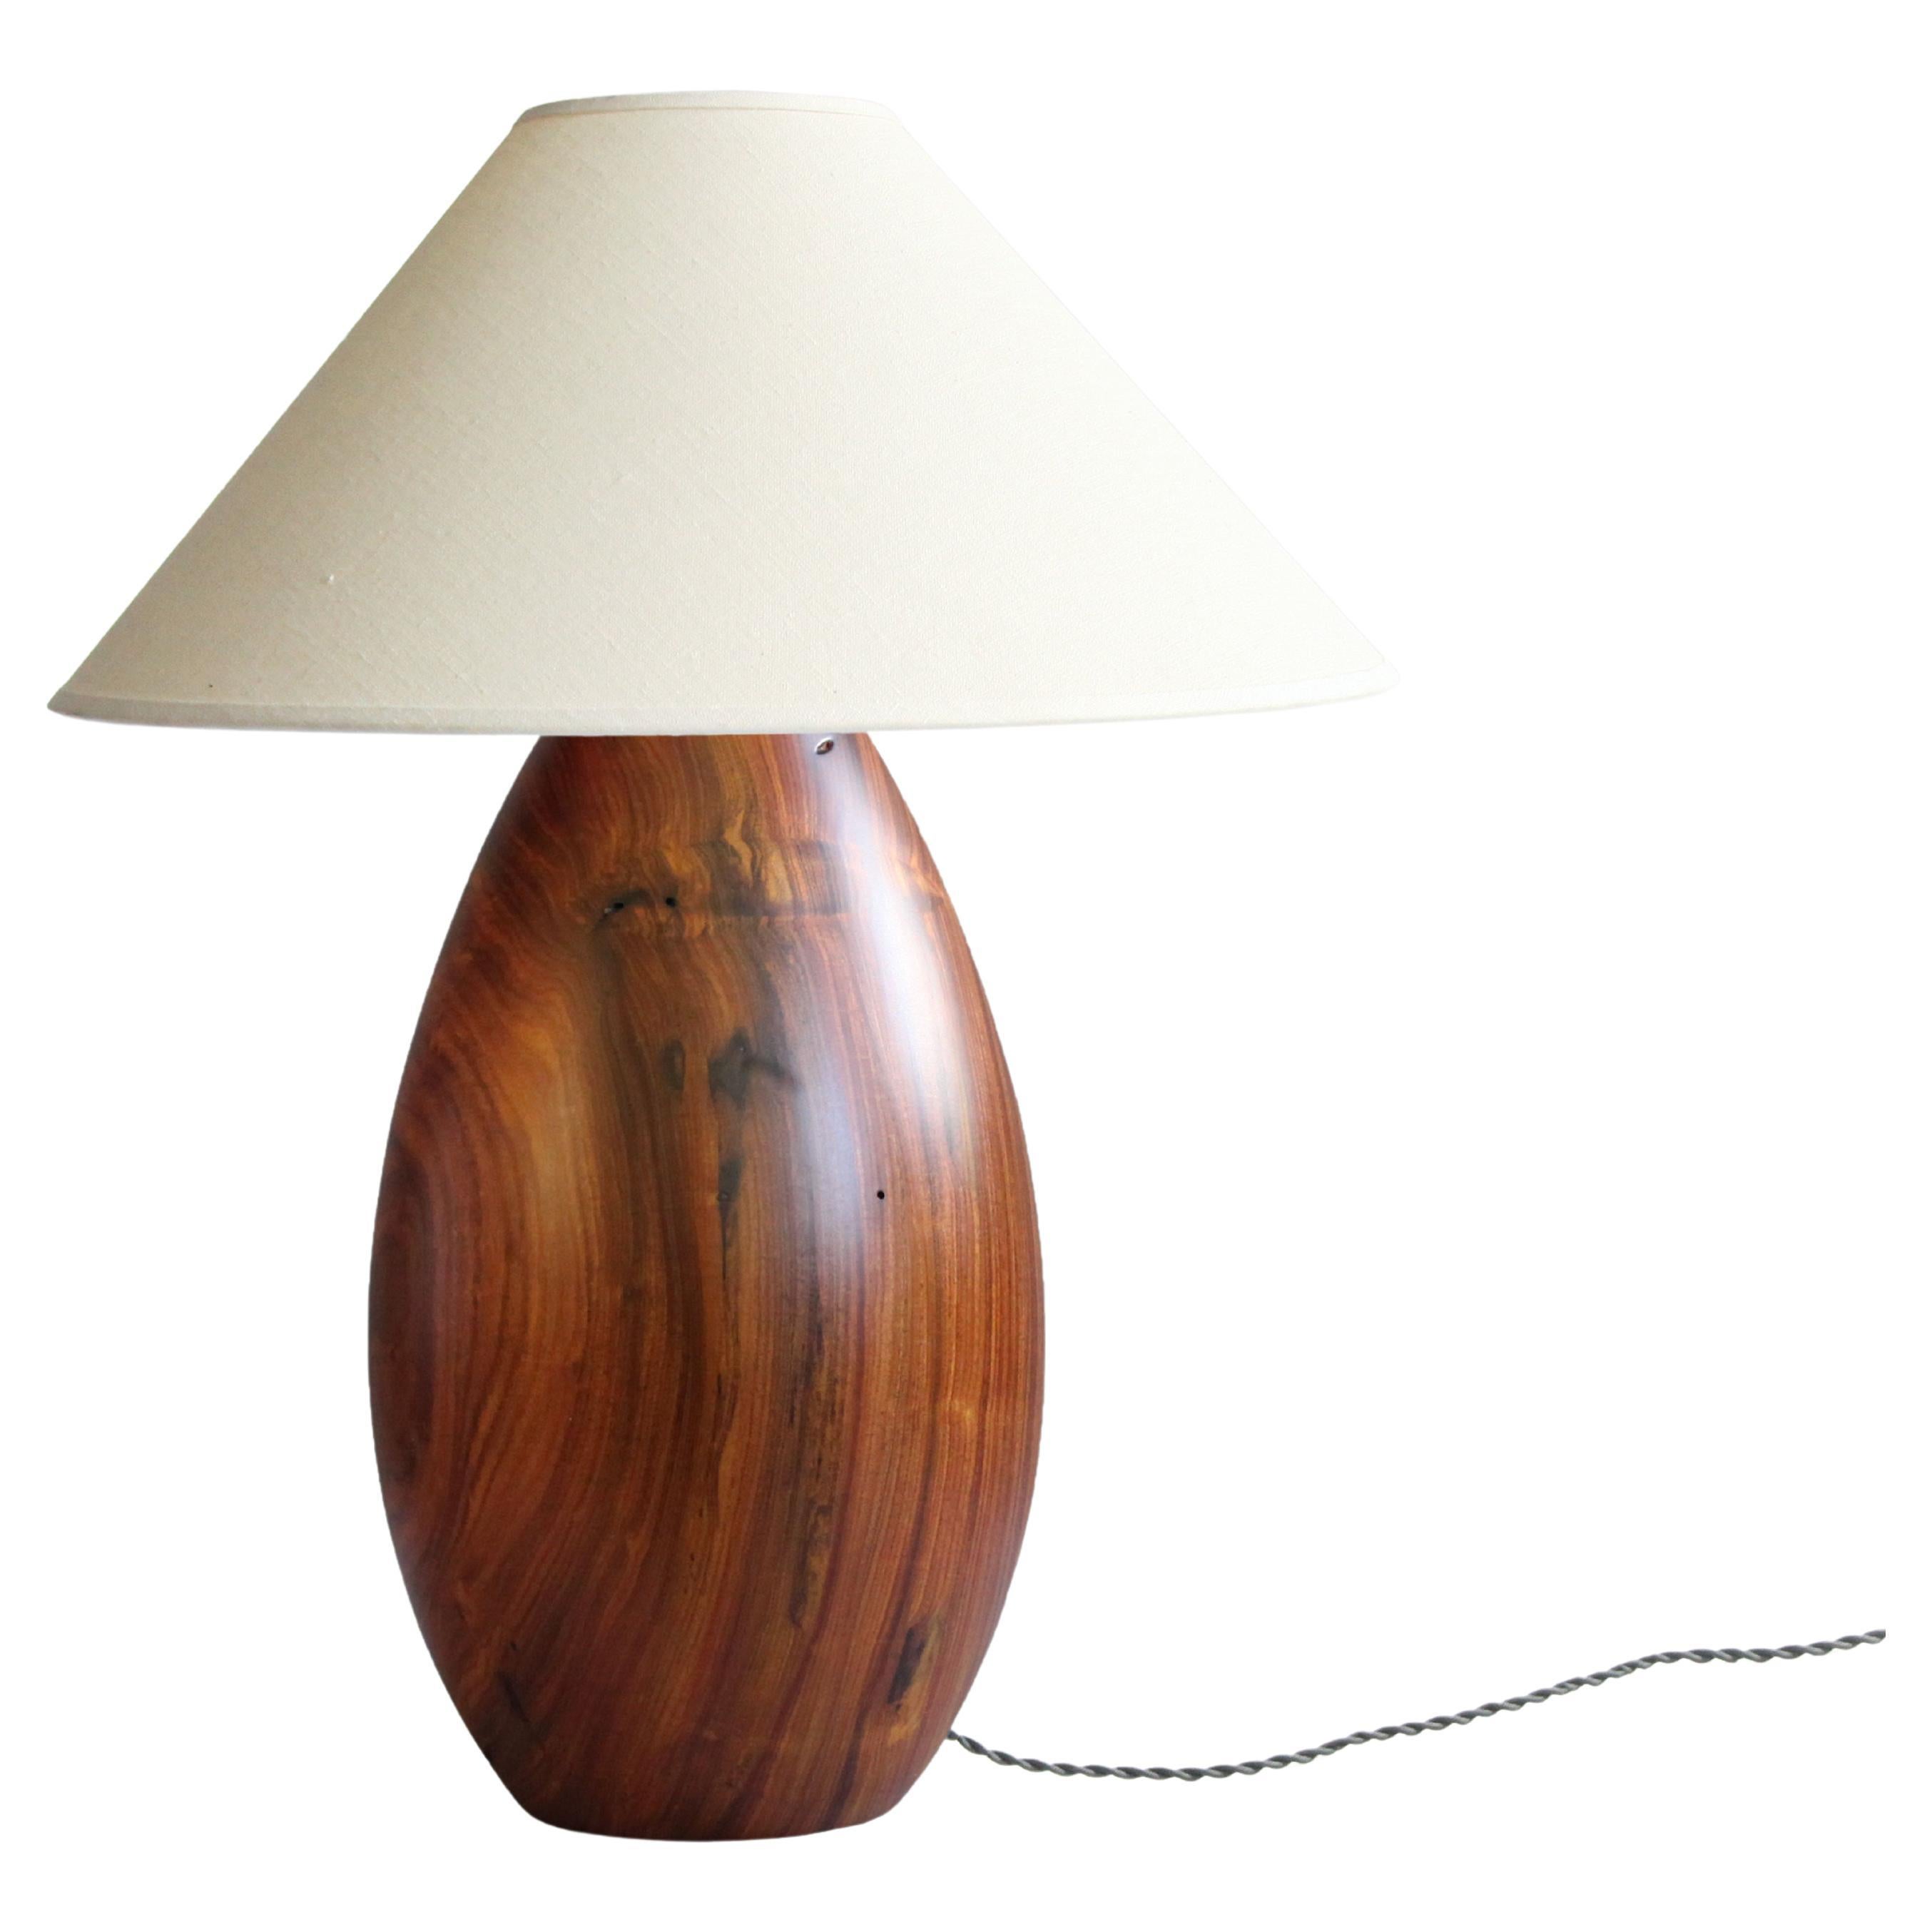 Tropical Hardwood Lamp and White Linen Shade, Large, Árbol Collection, 46